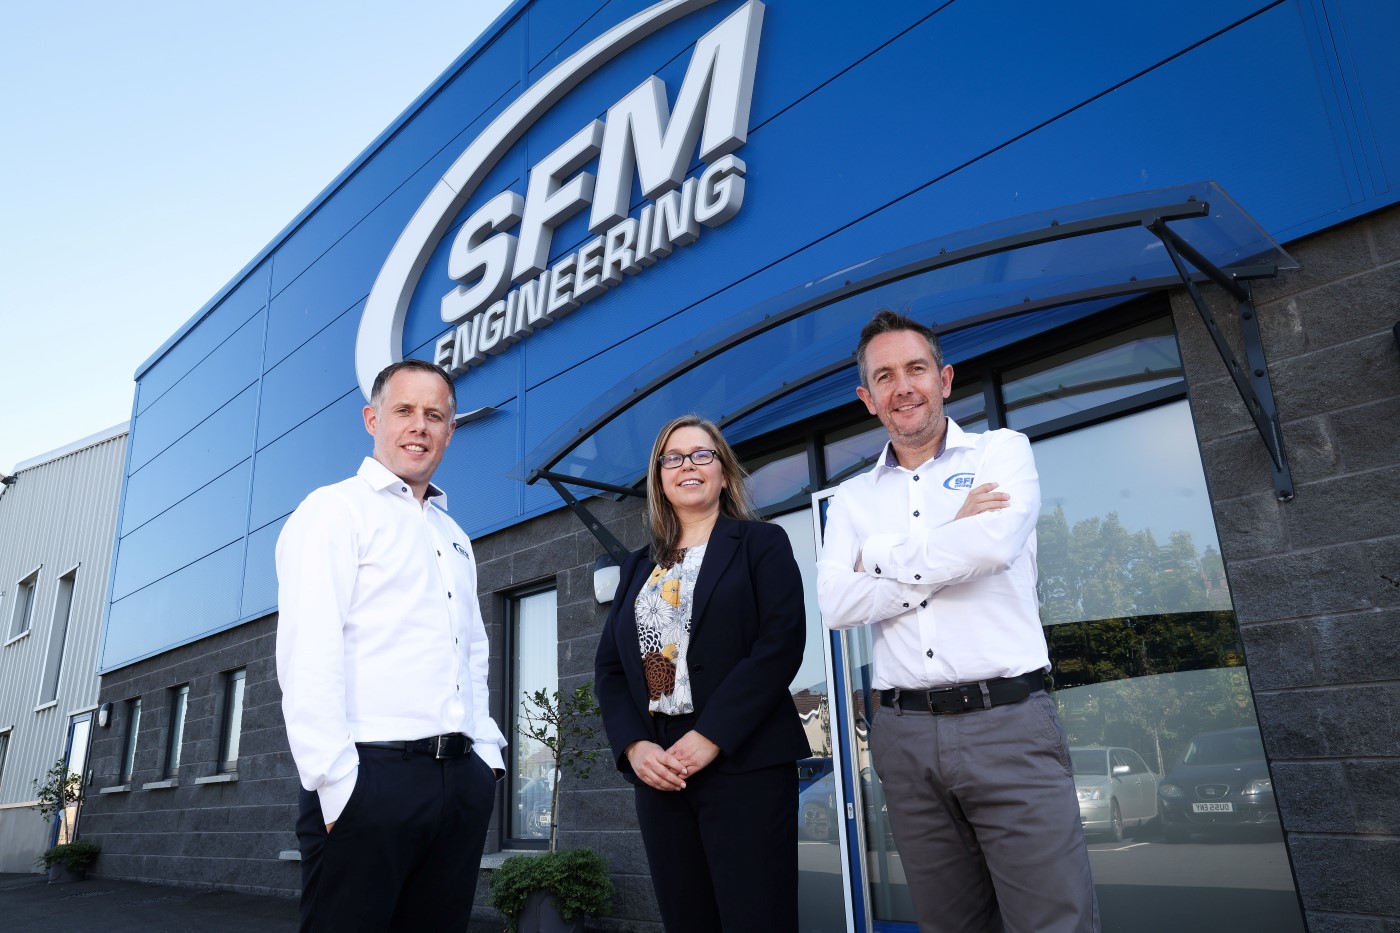 (from left) are Barry Breen, technical director at SFM Engineering; Diane McCall, senior business manager, Bank of Ireland UK; and Paul Breen, managing and commercial director at SFM Engineering